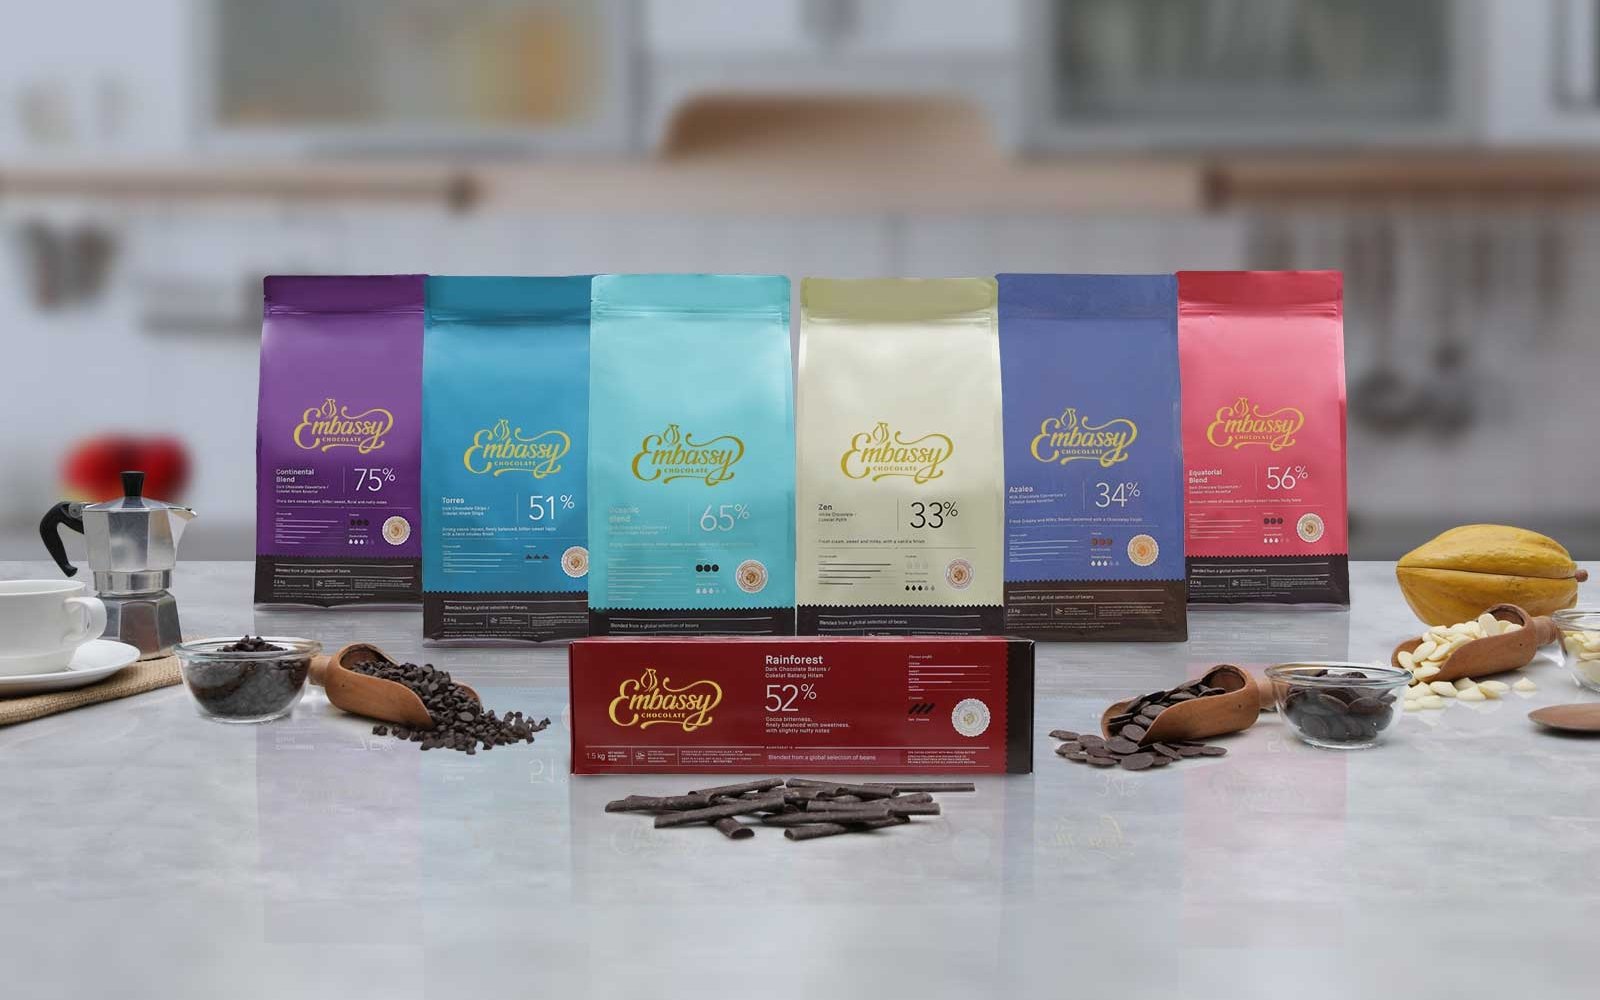 Where to Find Embassy Chocolate Couverture in Indonesia?